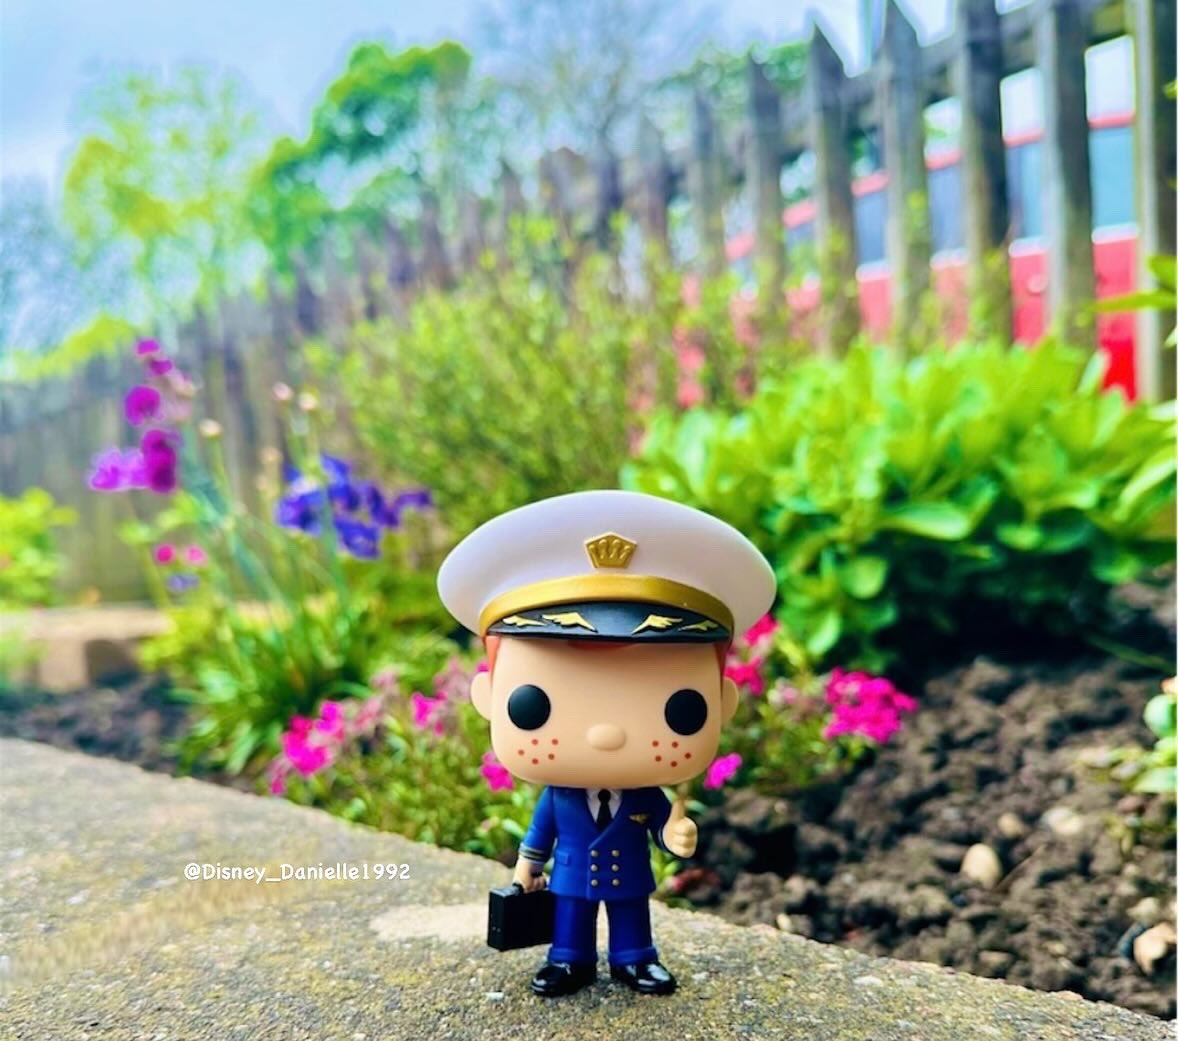 Just caught Freddy on his way to work this morning. ✈️👍🏻💼

Such a smart little handsome chap in his uniform! Absolutely LOVE this POP. 
🥺😍

#FunkoPOPVinyl #MyFunkoStory #FunkoUnboxed #Funko #FreddyFunko

@OriginalFunko @FunkoEurope